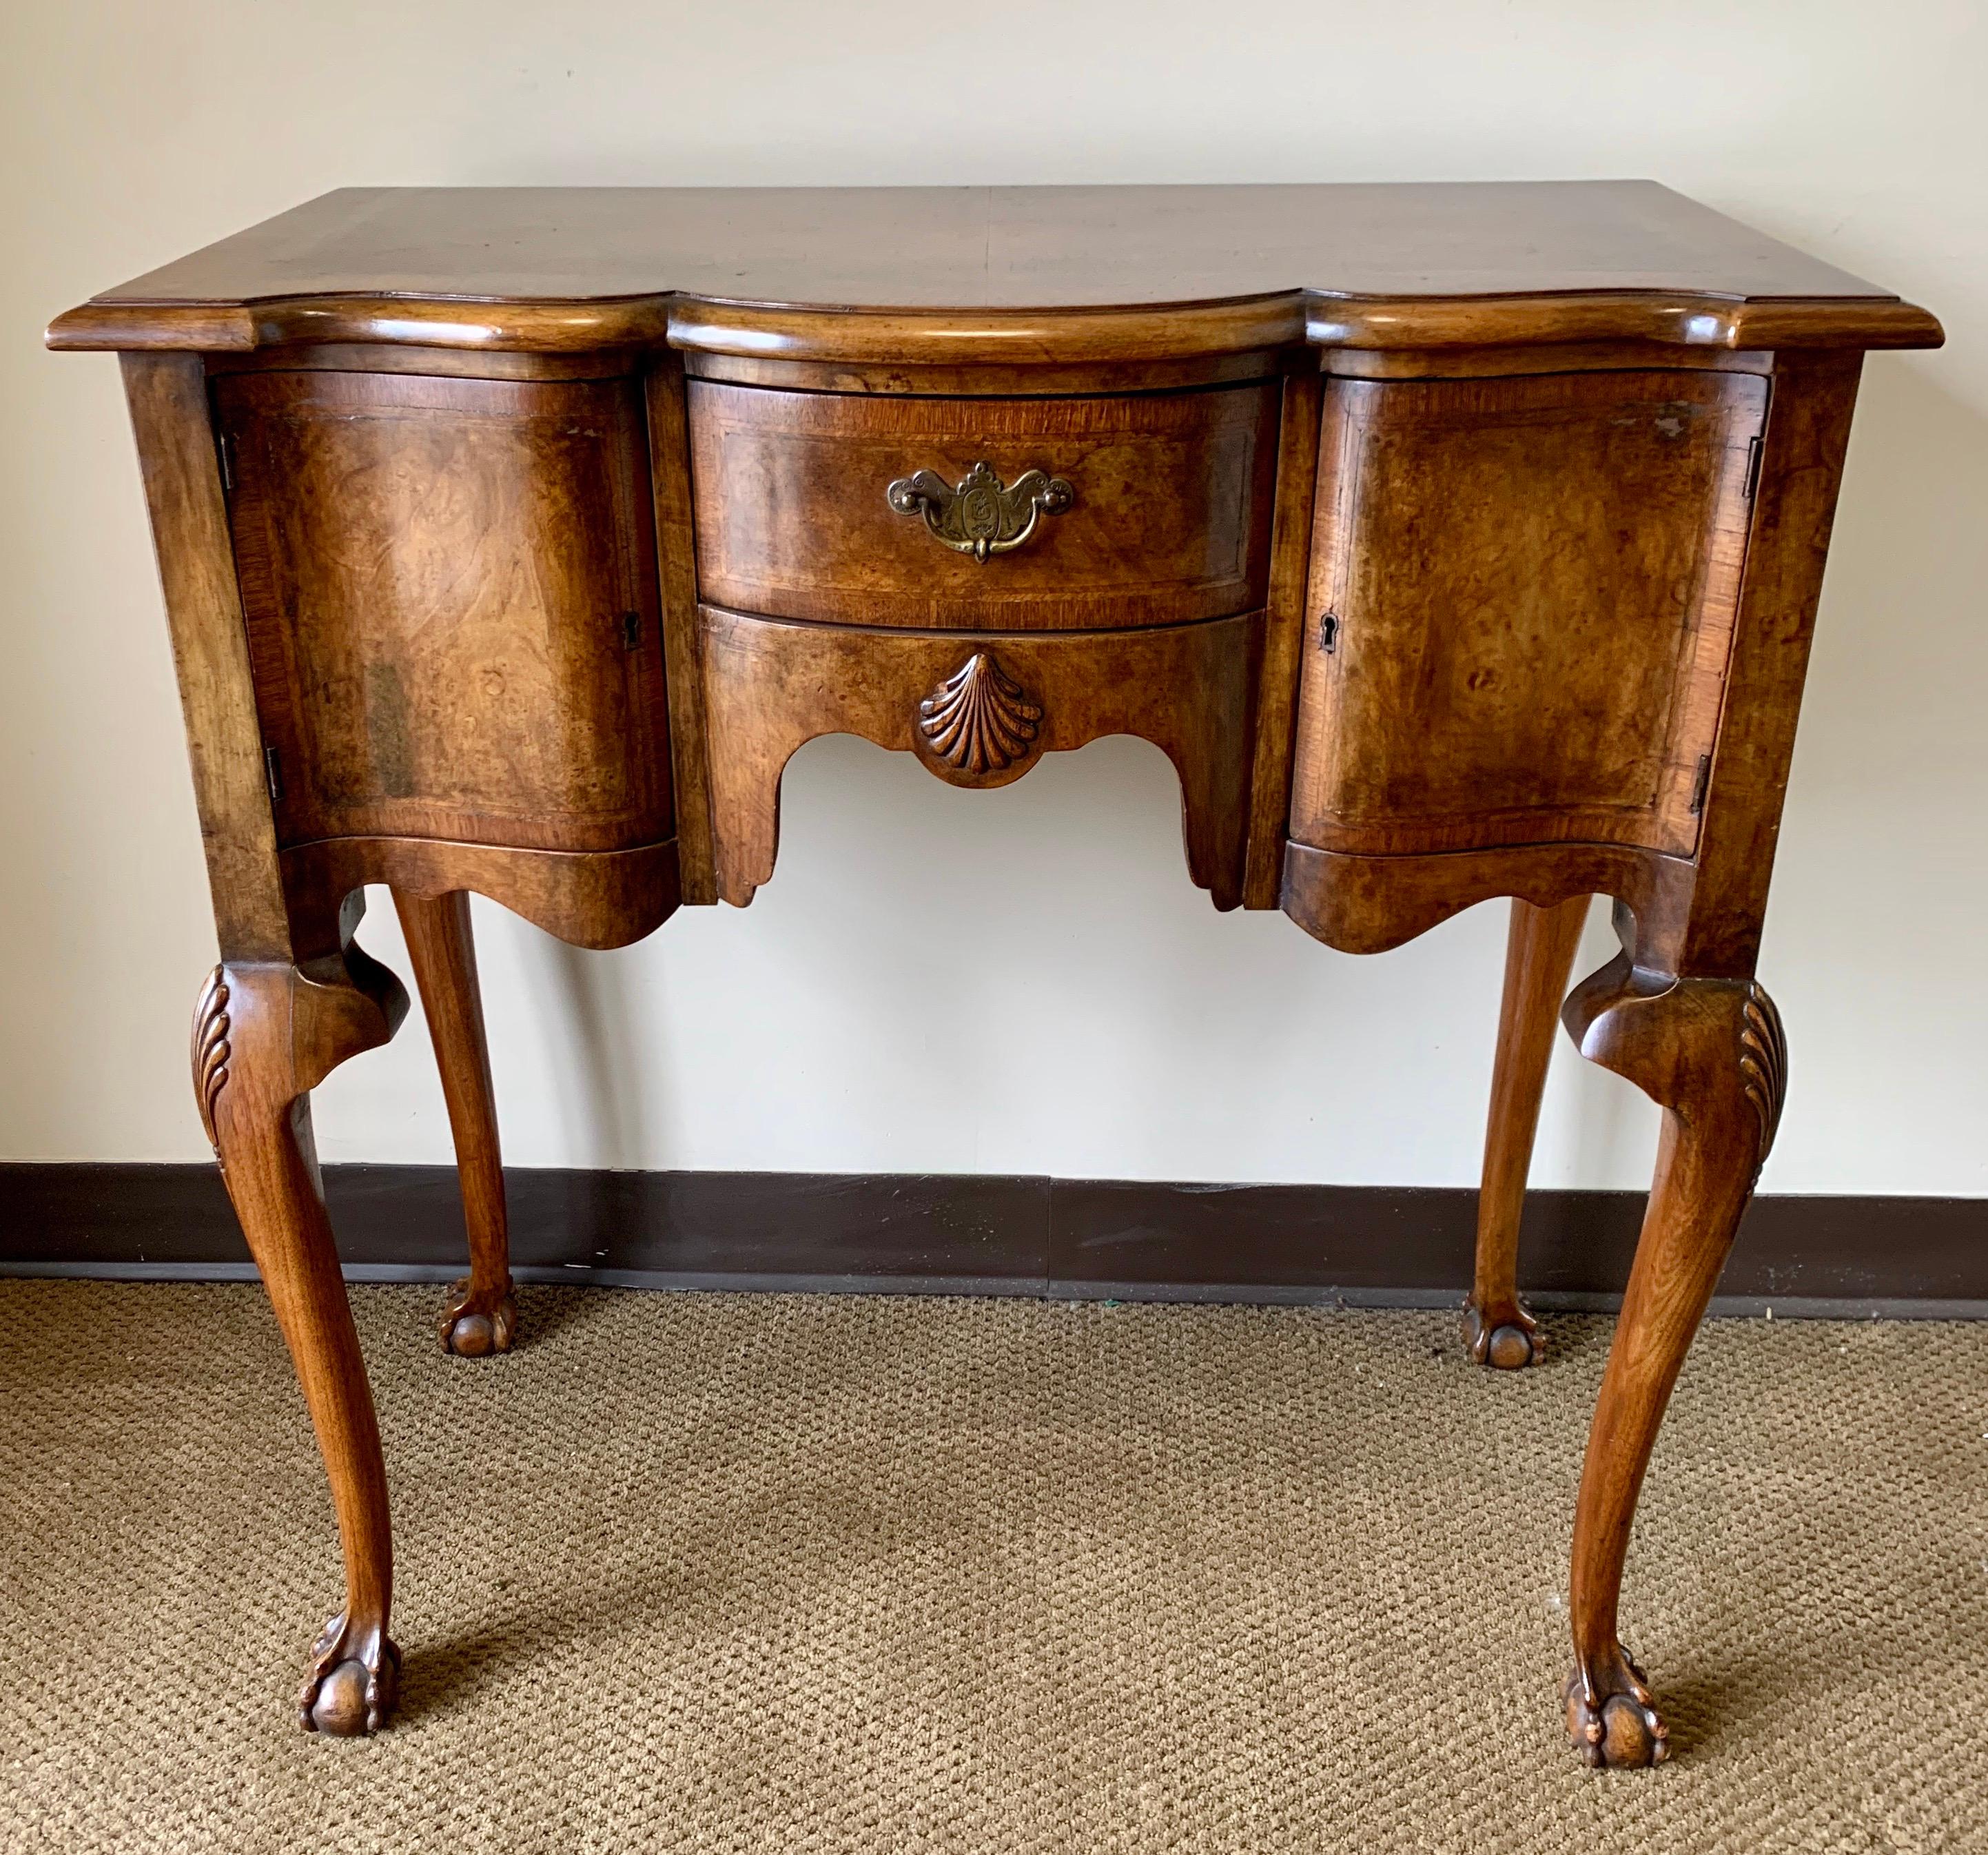 Coveted carved burled walnut console table with black lacquer and gold hand painted mirrors above. The table has storage and key to lock which make the possibilities endless. Dry bar, console table, accent table, foyer piece - your call! Dimensions